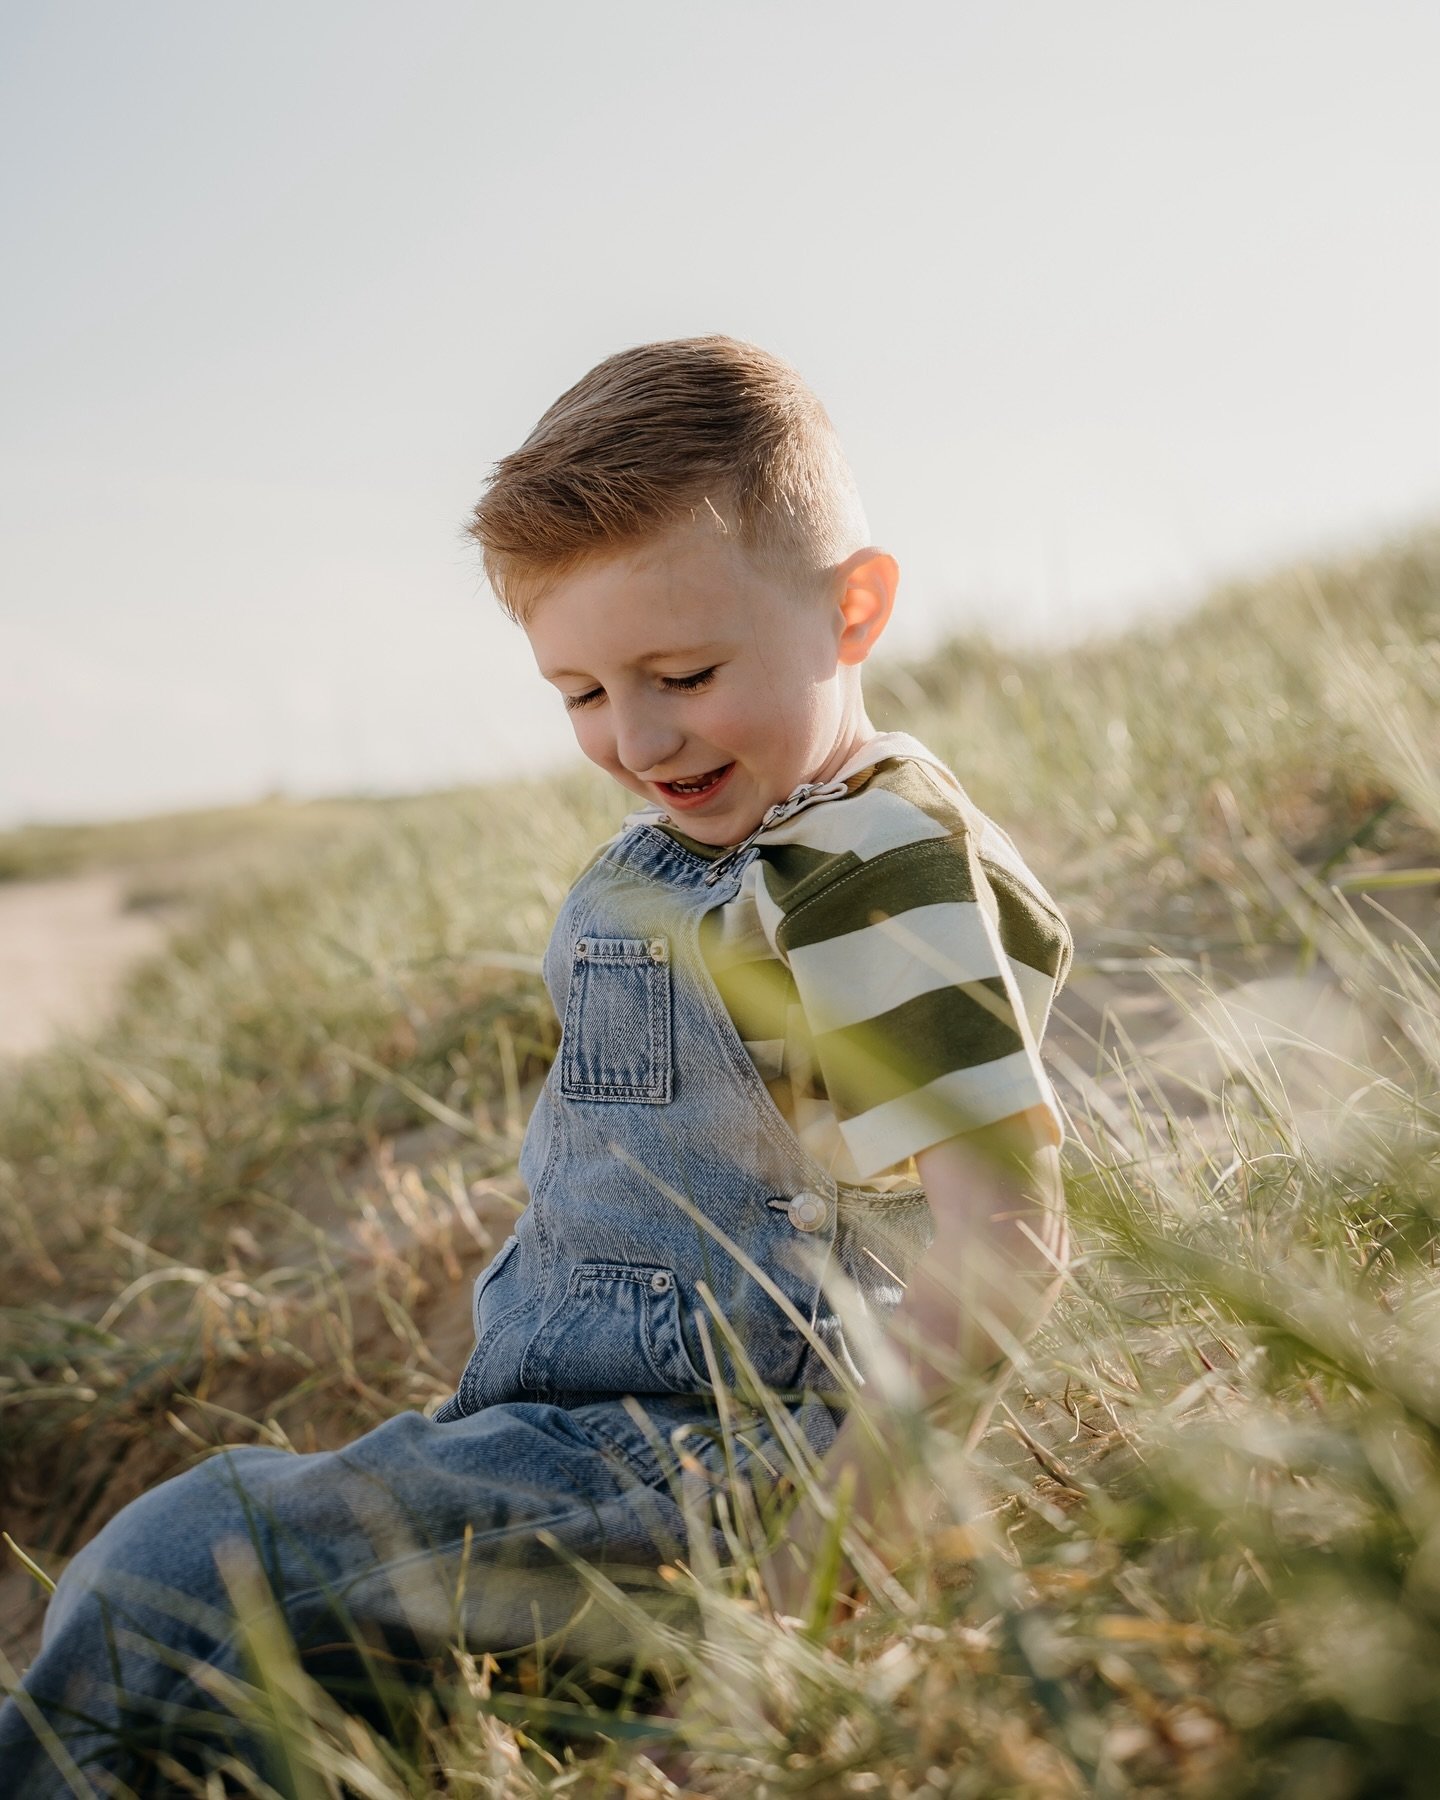 Amongst all of the misty days we&rsquo;ve been having, the sun peeked out for this one lovely evening with Frank. 

Running around in the grassy sand dunes, waves crashing and a lot of laughter. Perfect. 

Outdoor sessions are open to book now. 

🤍
